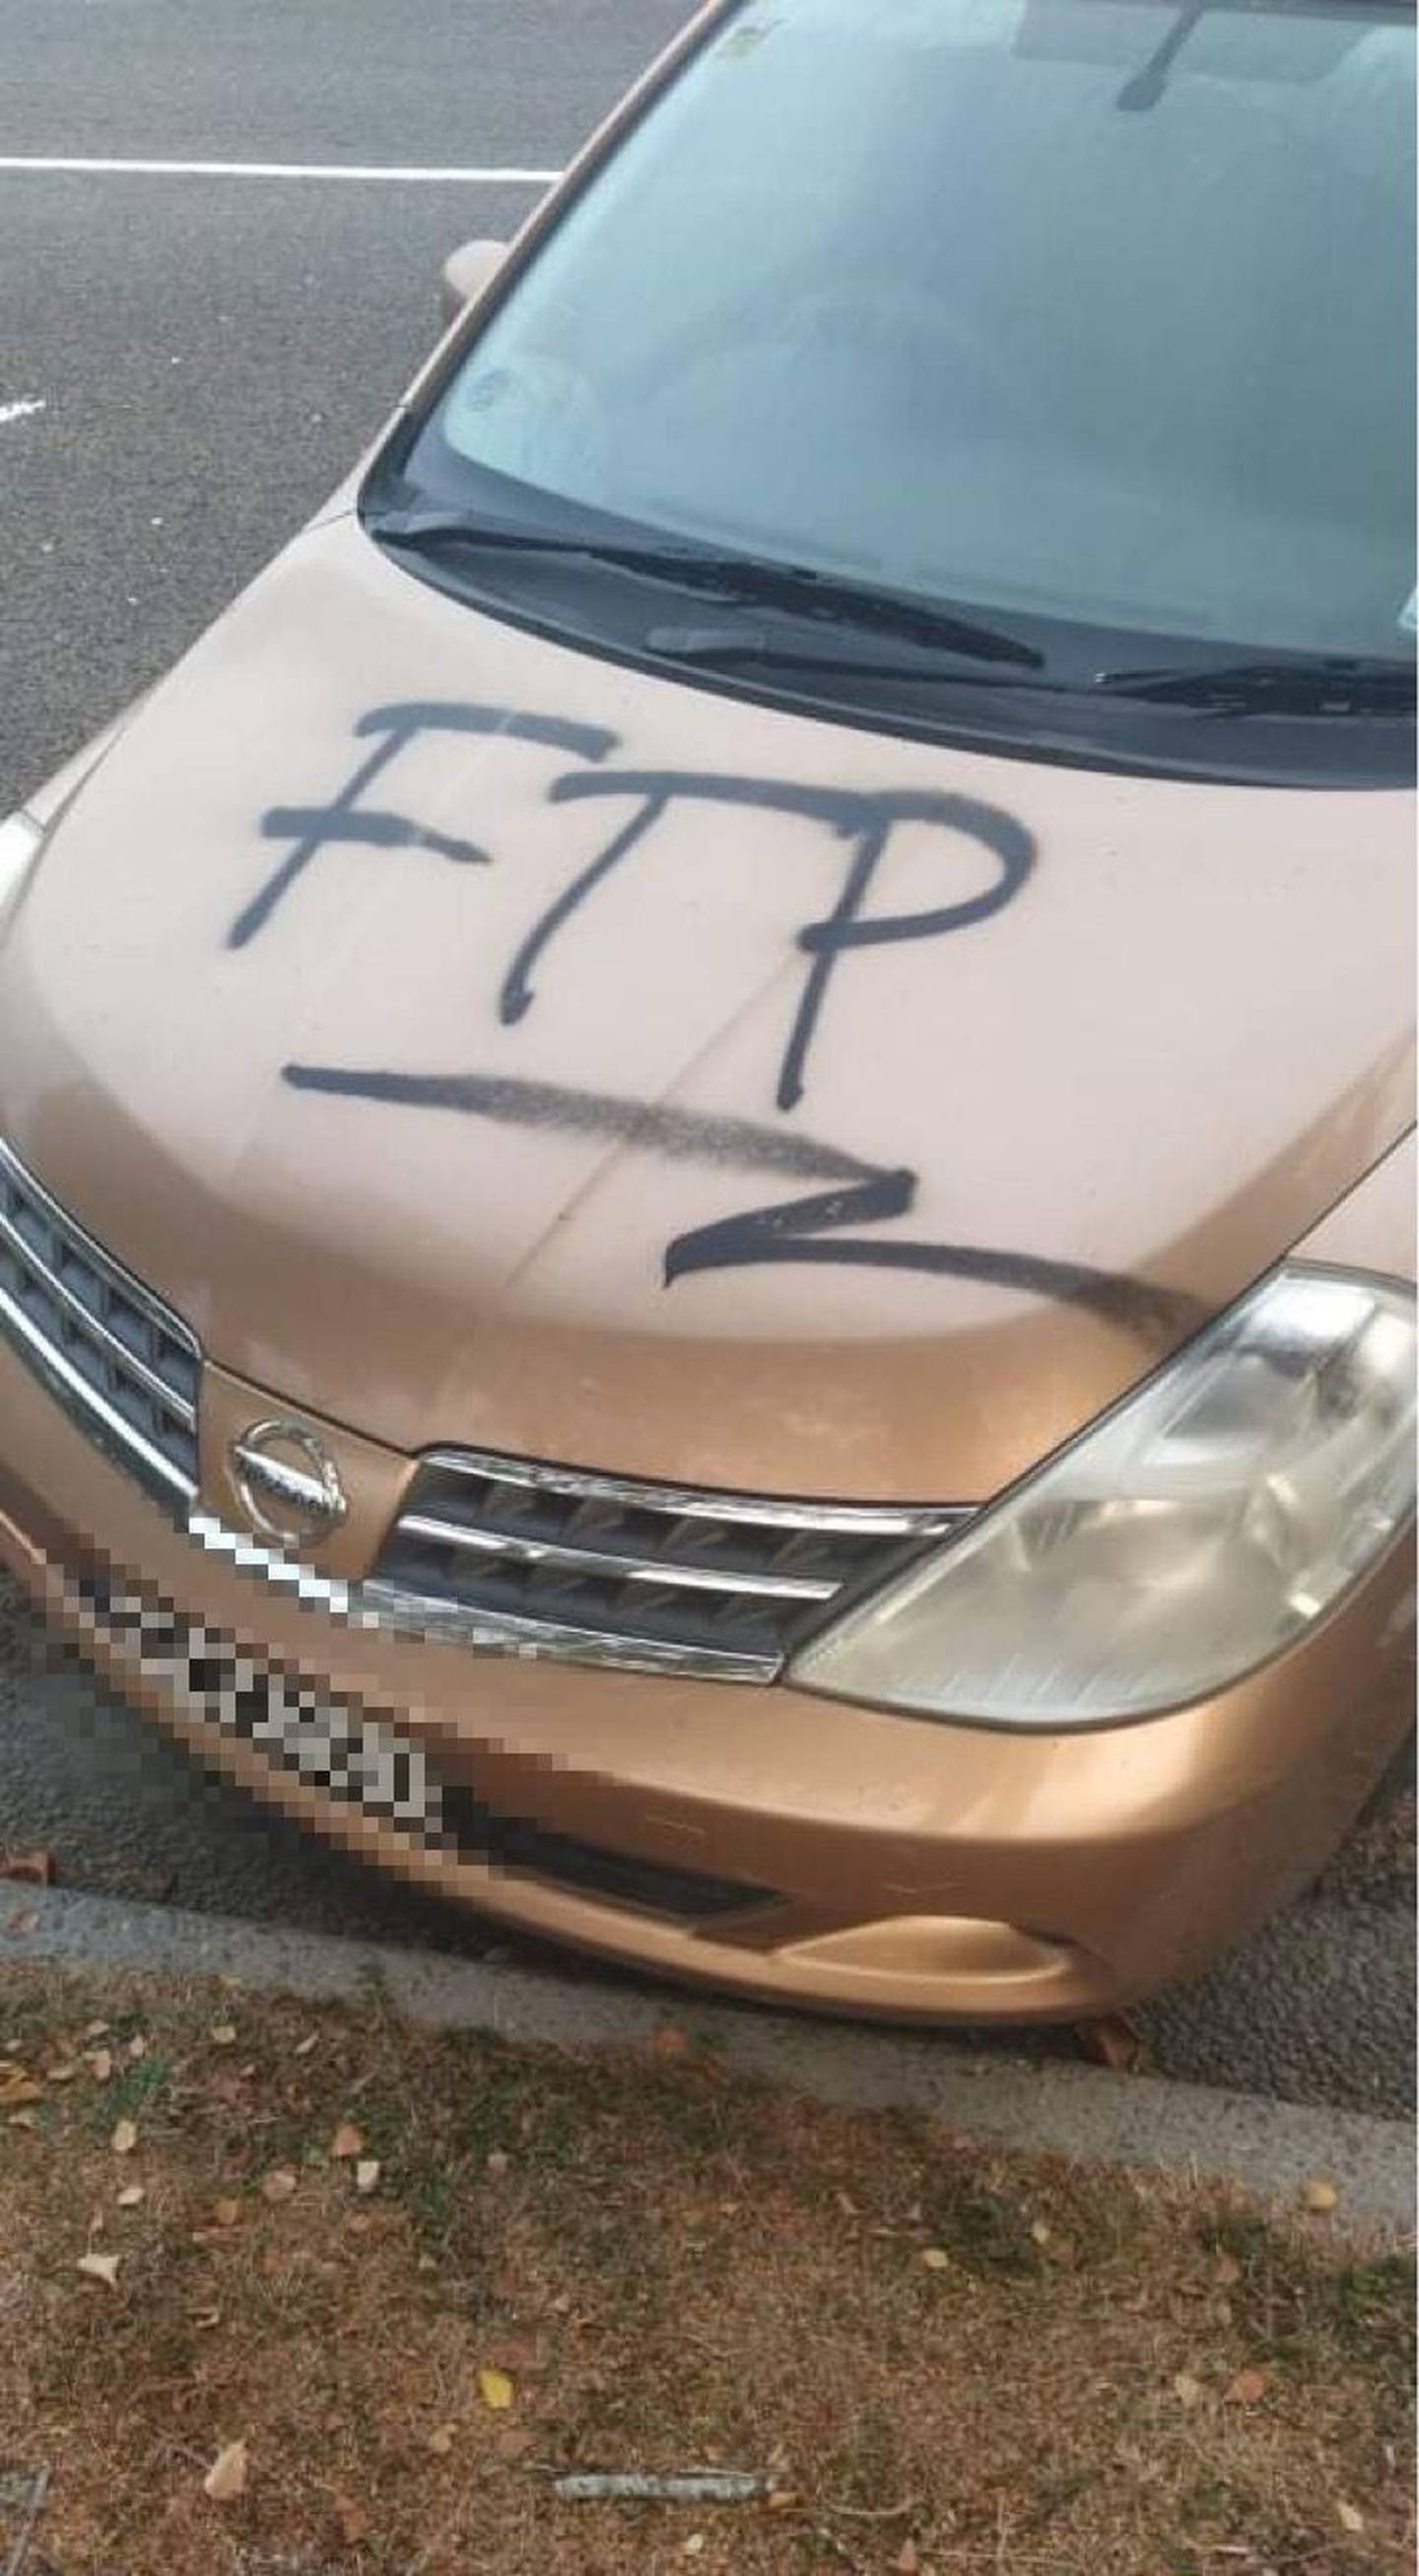 This car was reportedly vandalised in the Bishopdale area. Photo: Supplied